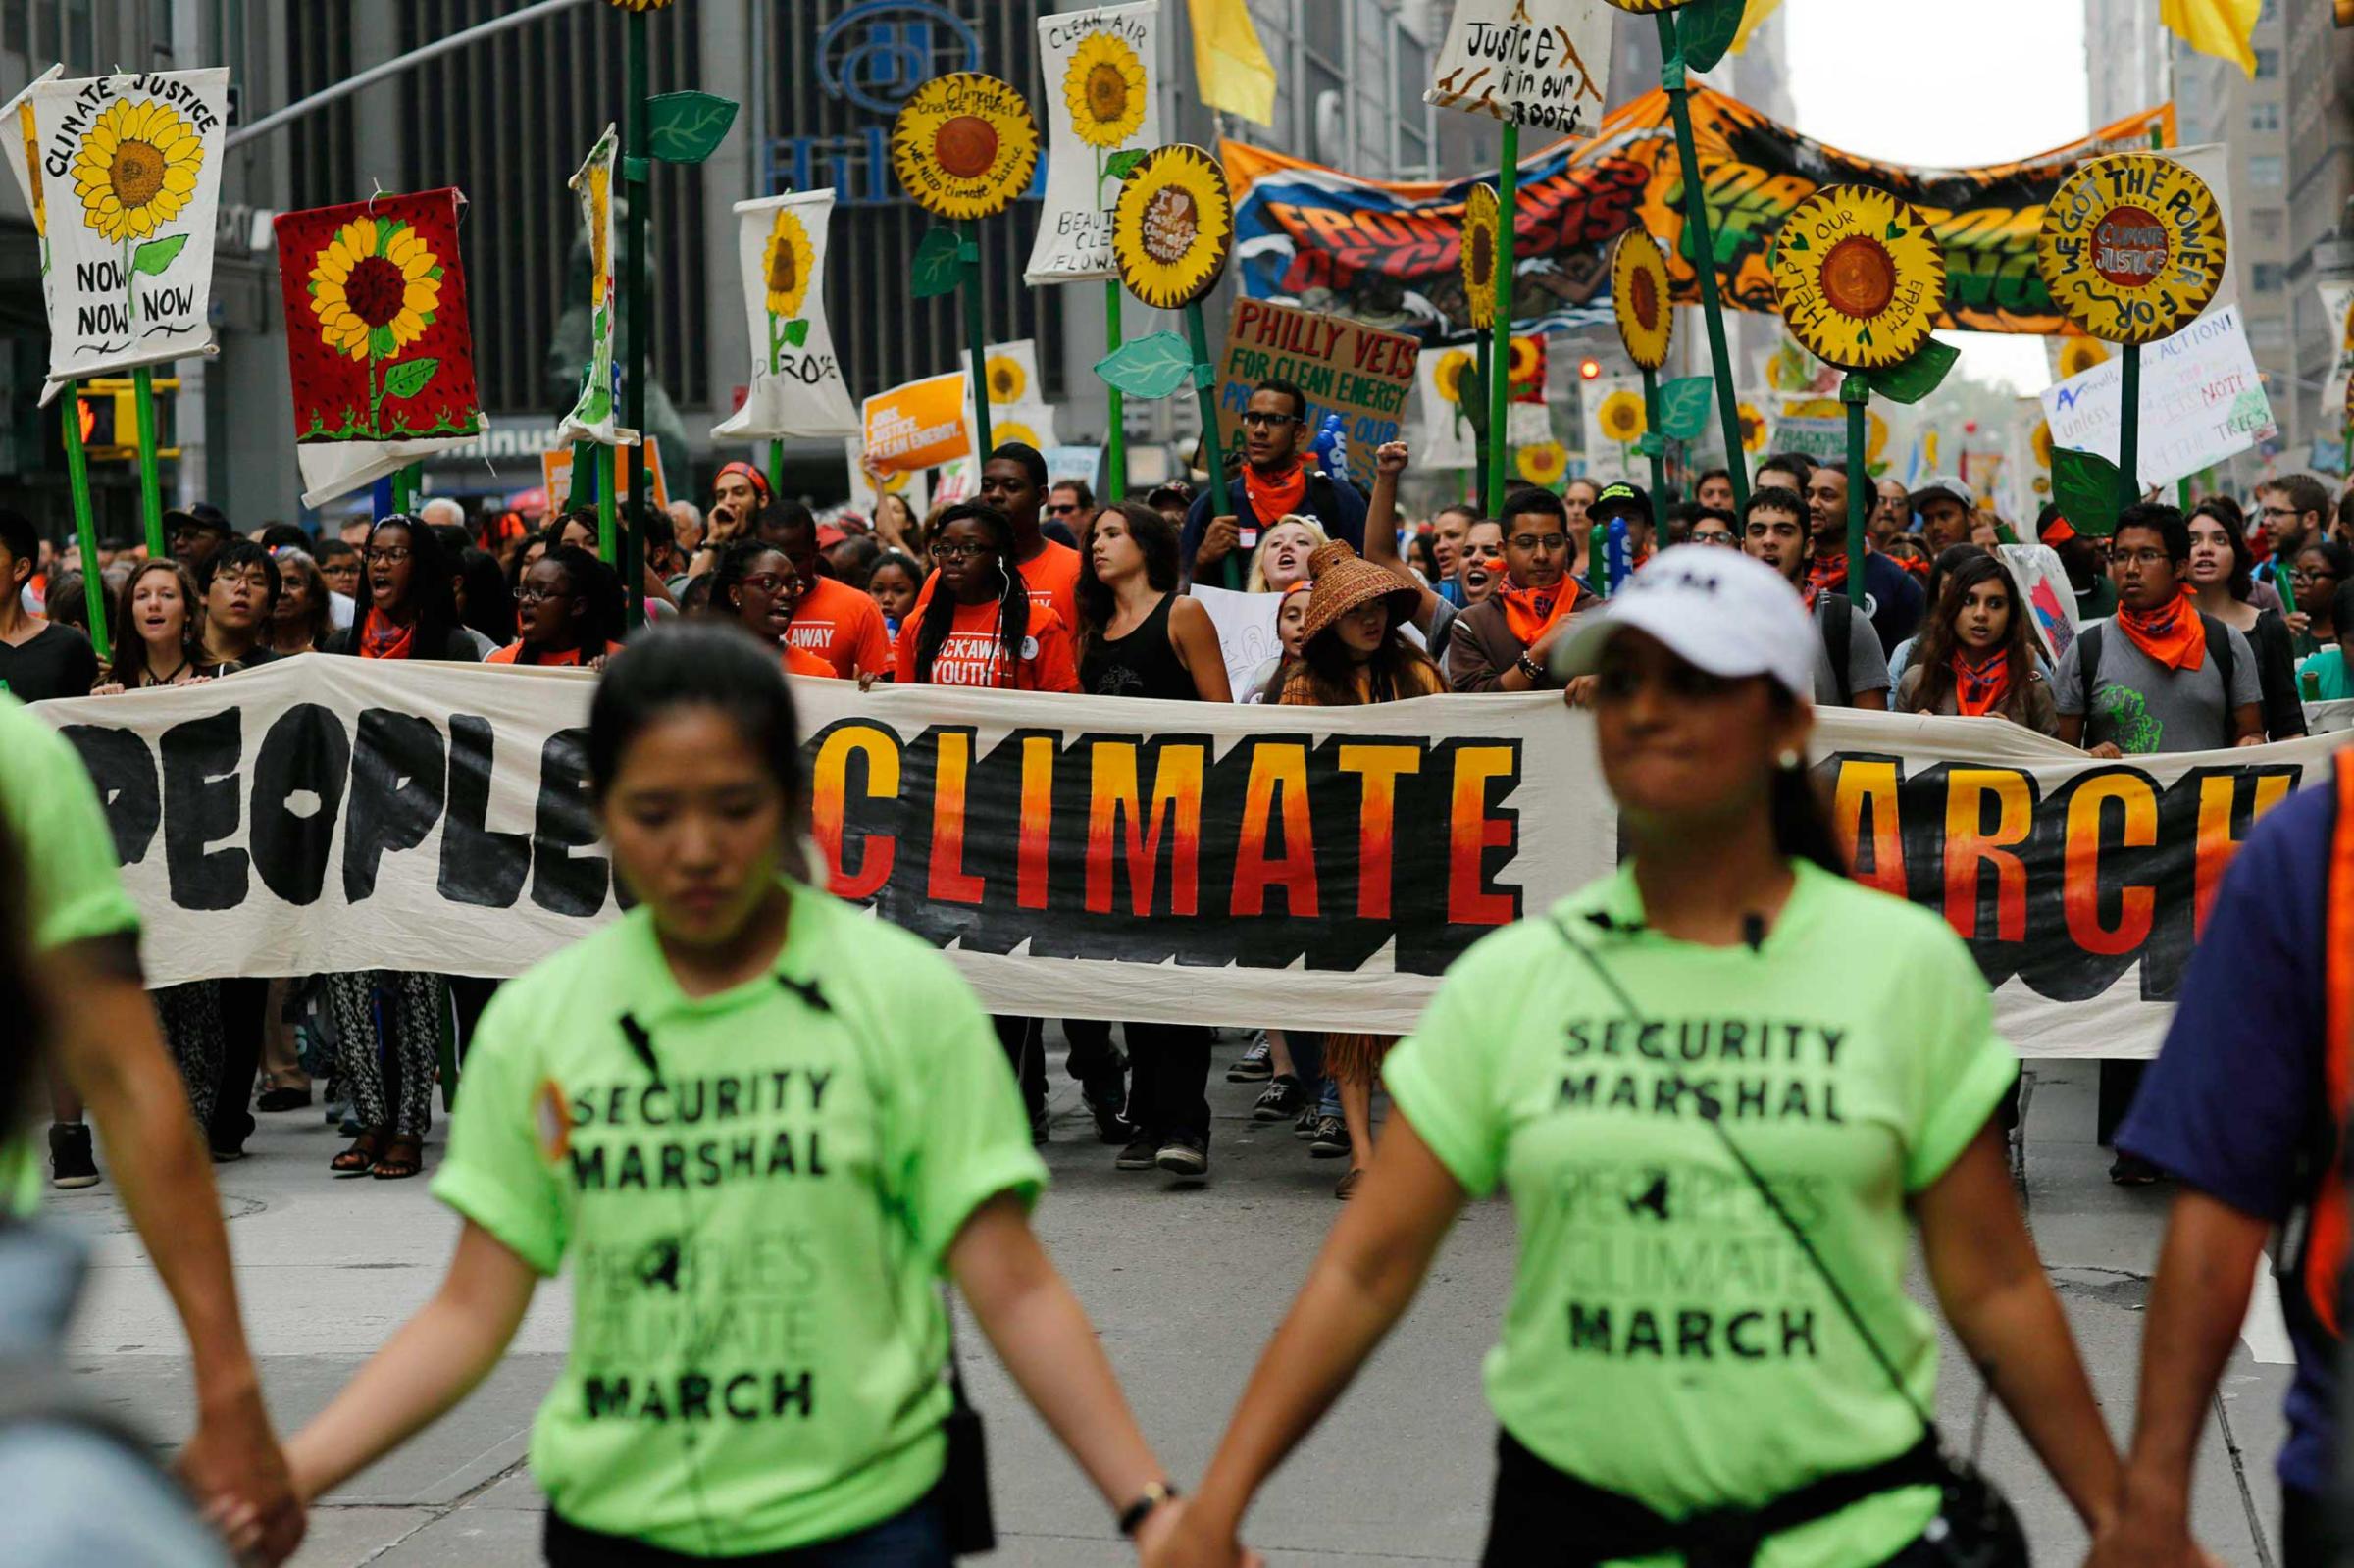 People take part in a march against climate change in New York